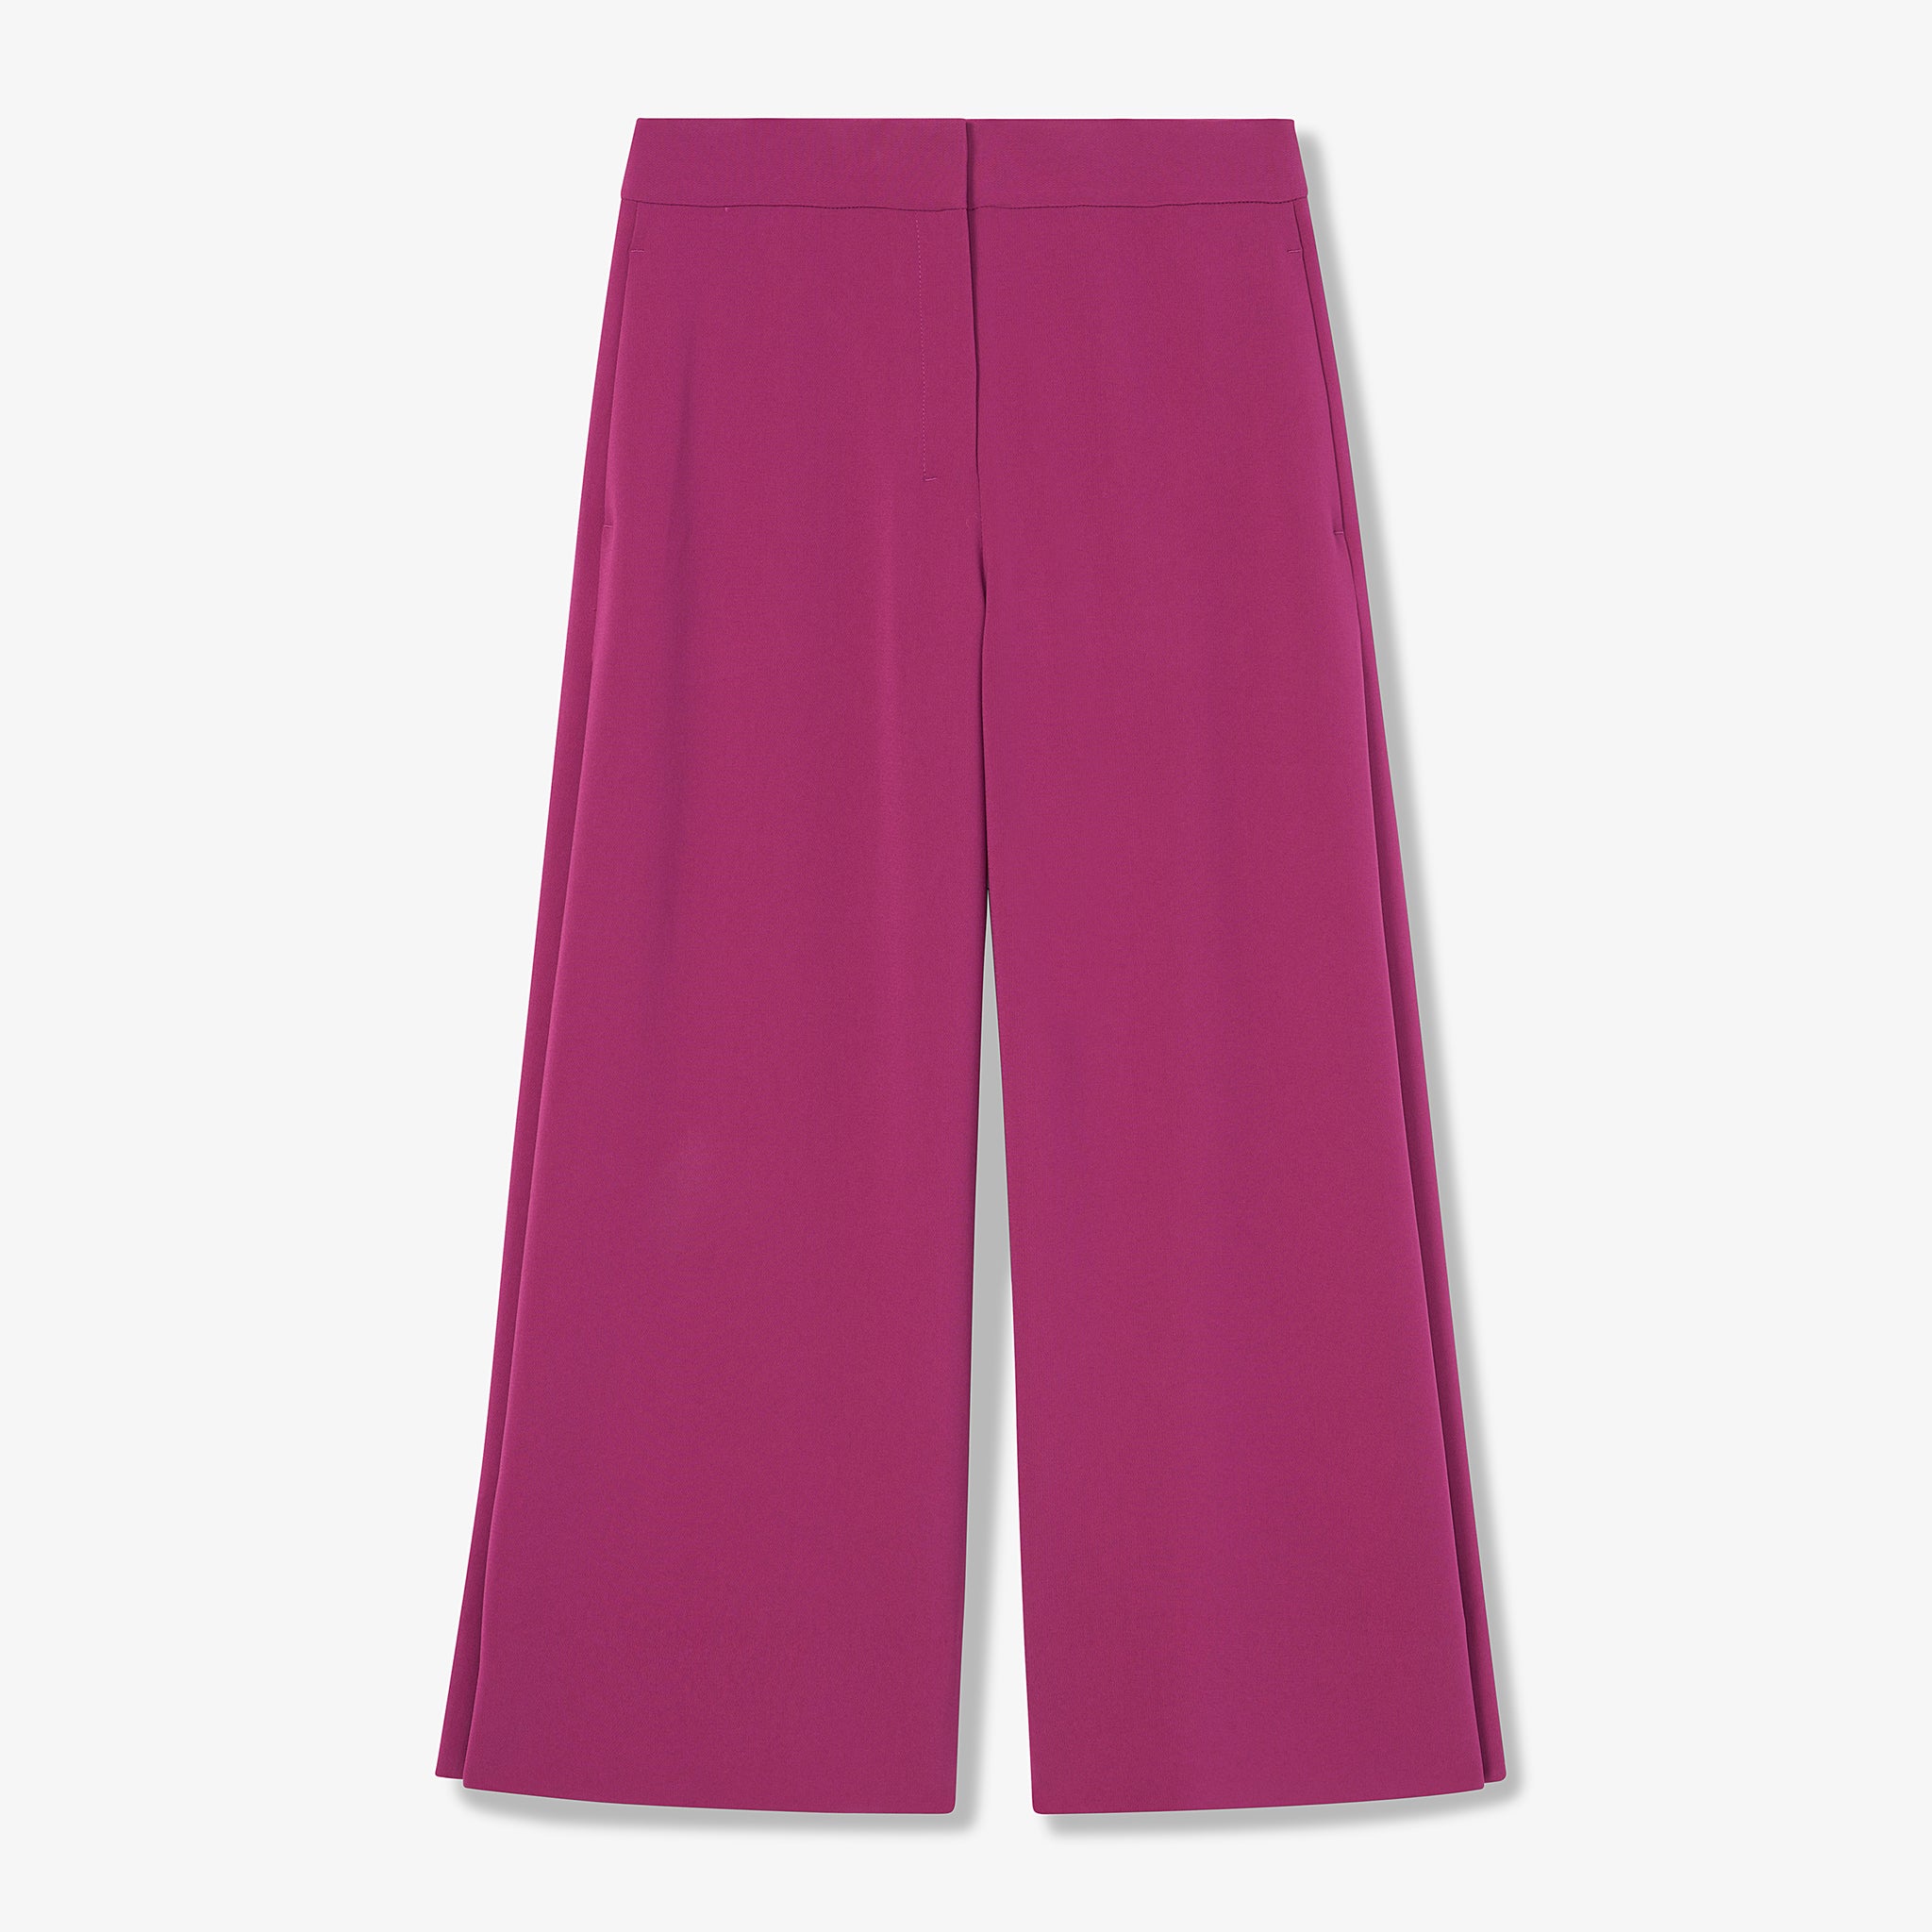 Packshot image of the Zhou Culotte - Eco Medium Crepe in Berry